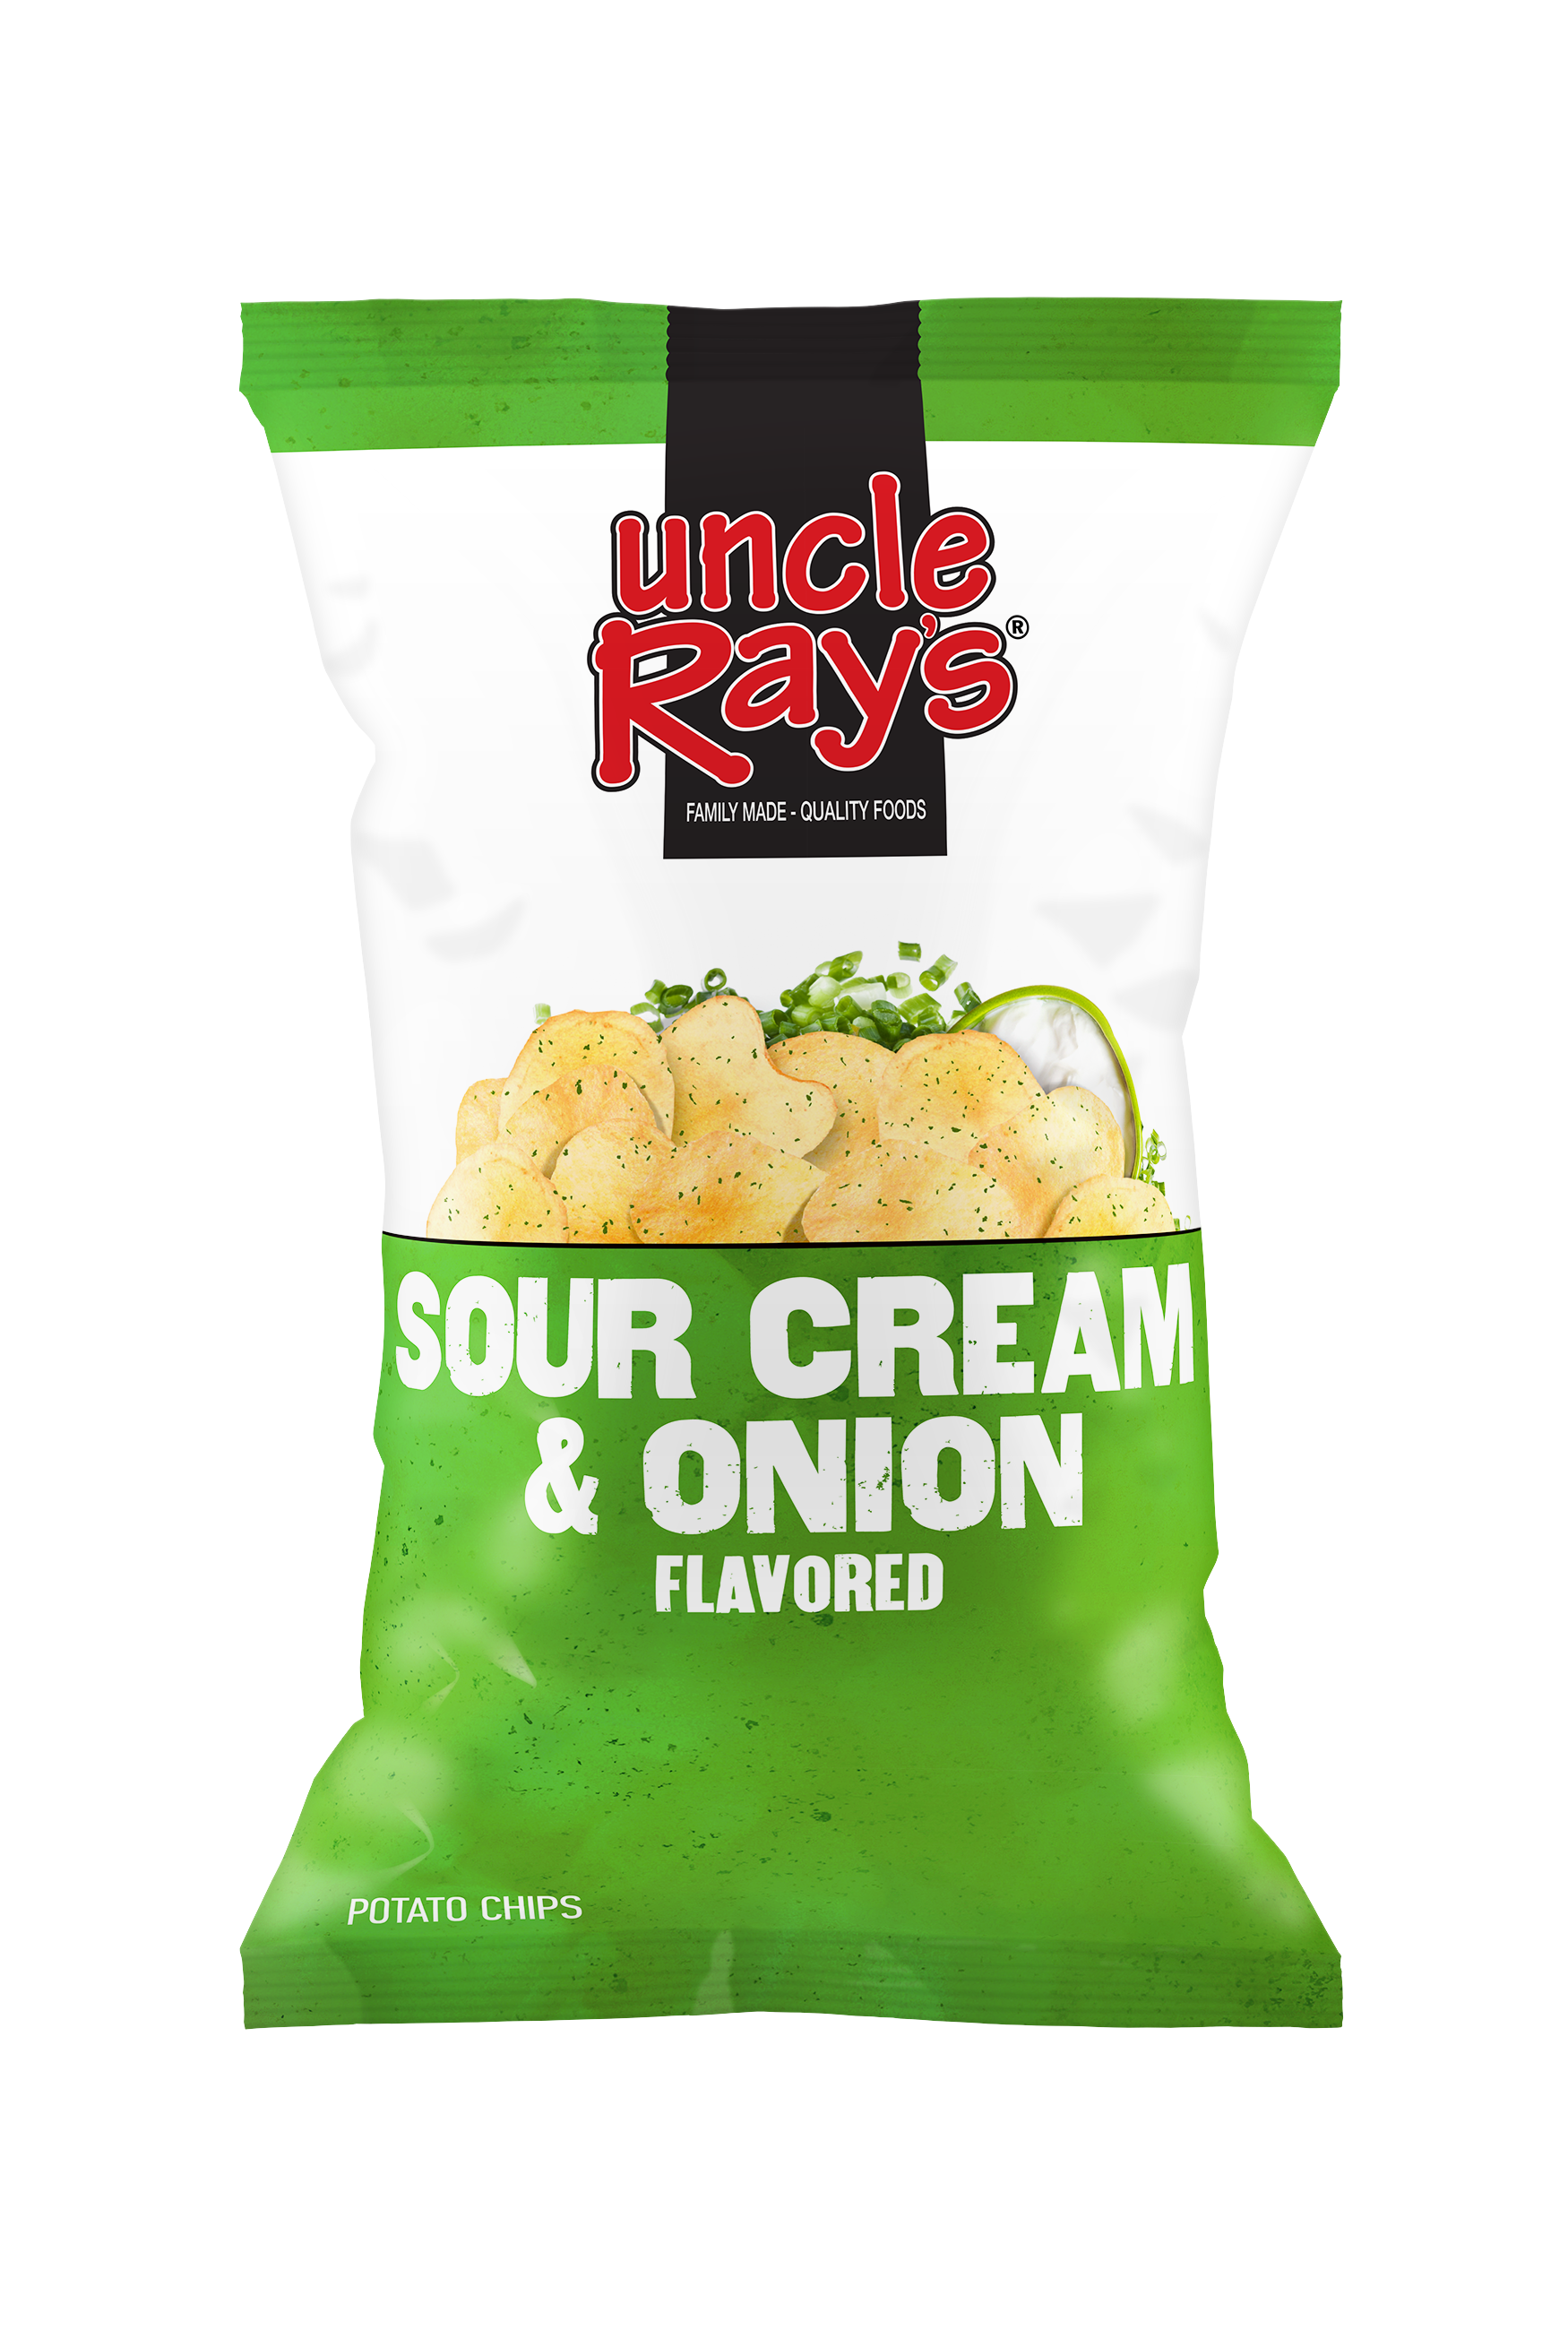 Uncle rays sour cream and onion chips 3oz